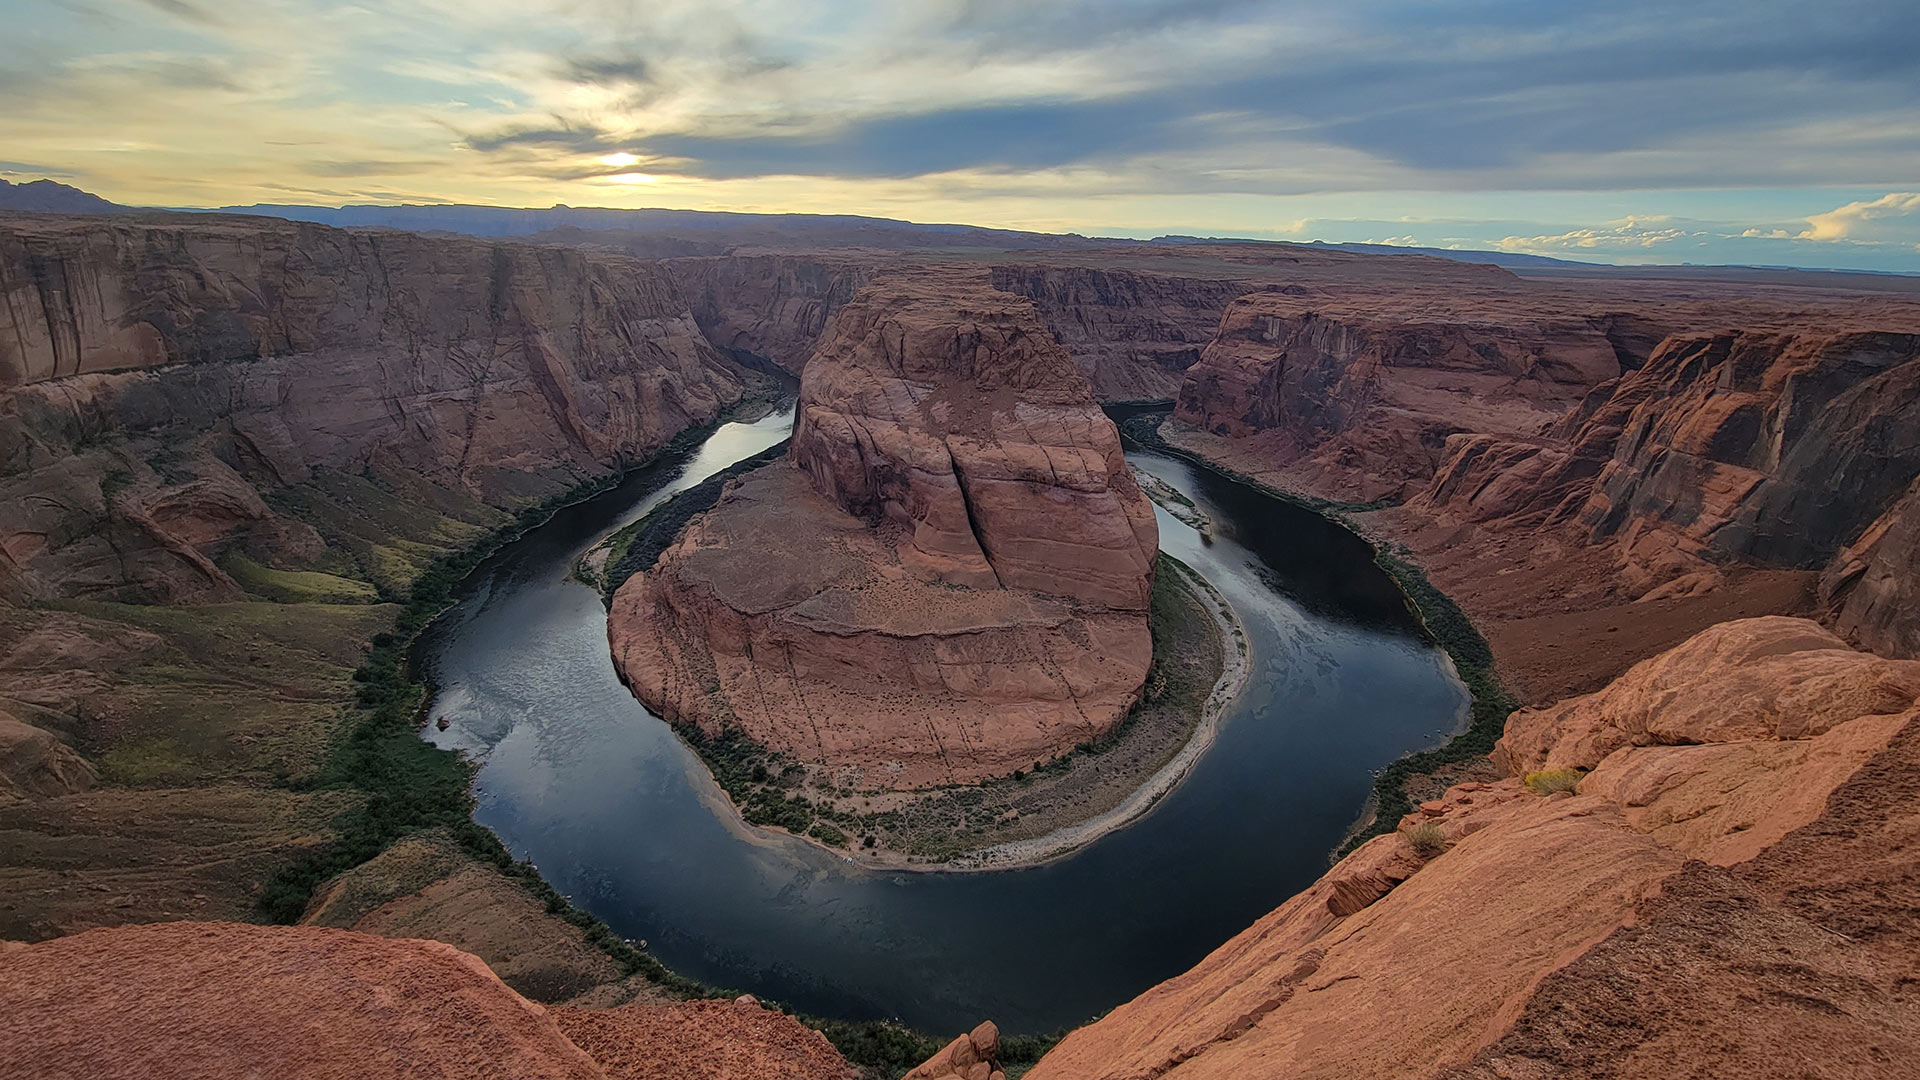 Horseshoe Bend is among the major tourism draws for Page. The waters are significantly calmer due to its location downstream of Glen Canyon Dam.